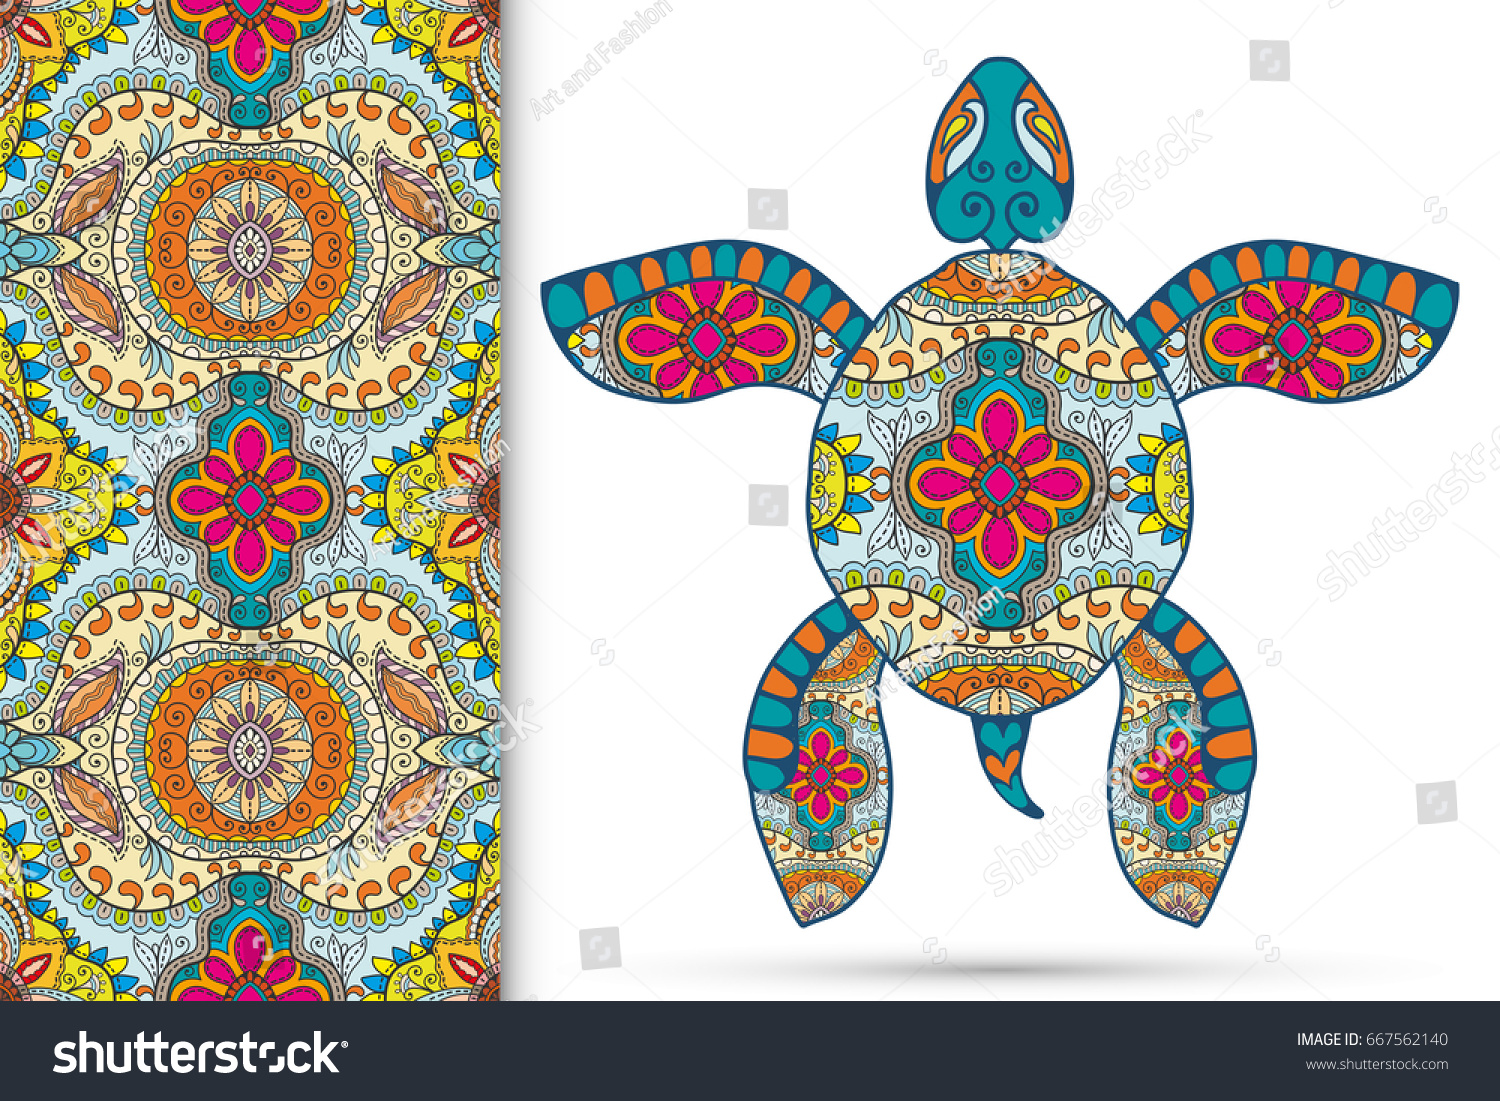 SVG of Decorative turtle with ornament and seamless floral geometric pattern, vector tribal totem animal, isolated elements for scrapbook, invitation or greeting card design svg